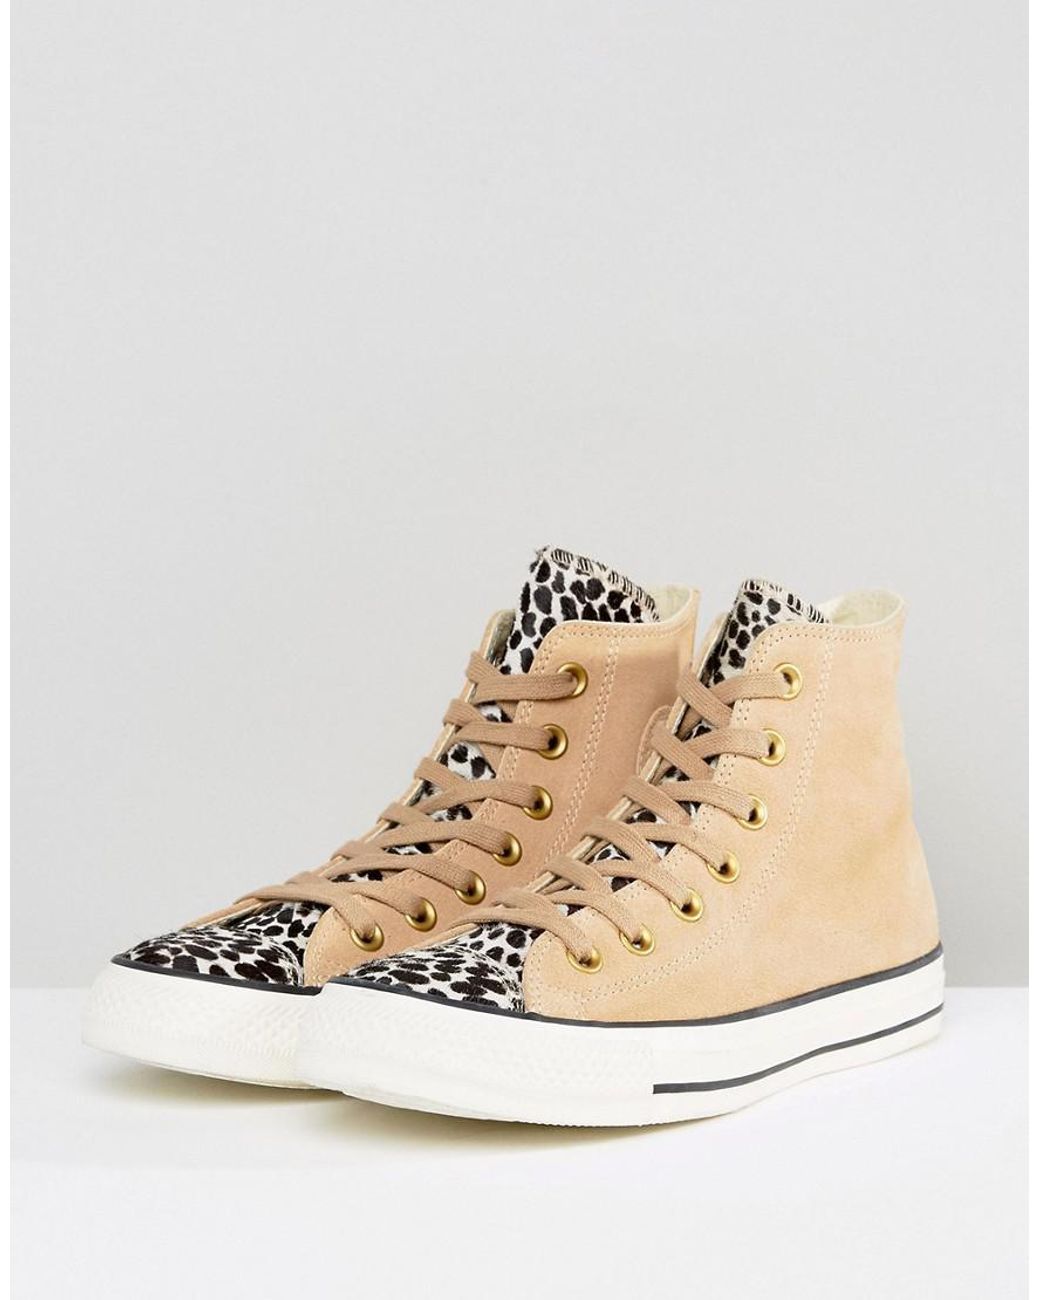 Converse Chuck Taylor All Star Leopard Hi Top Sneakers In Tan in Natural |  Lyst